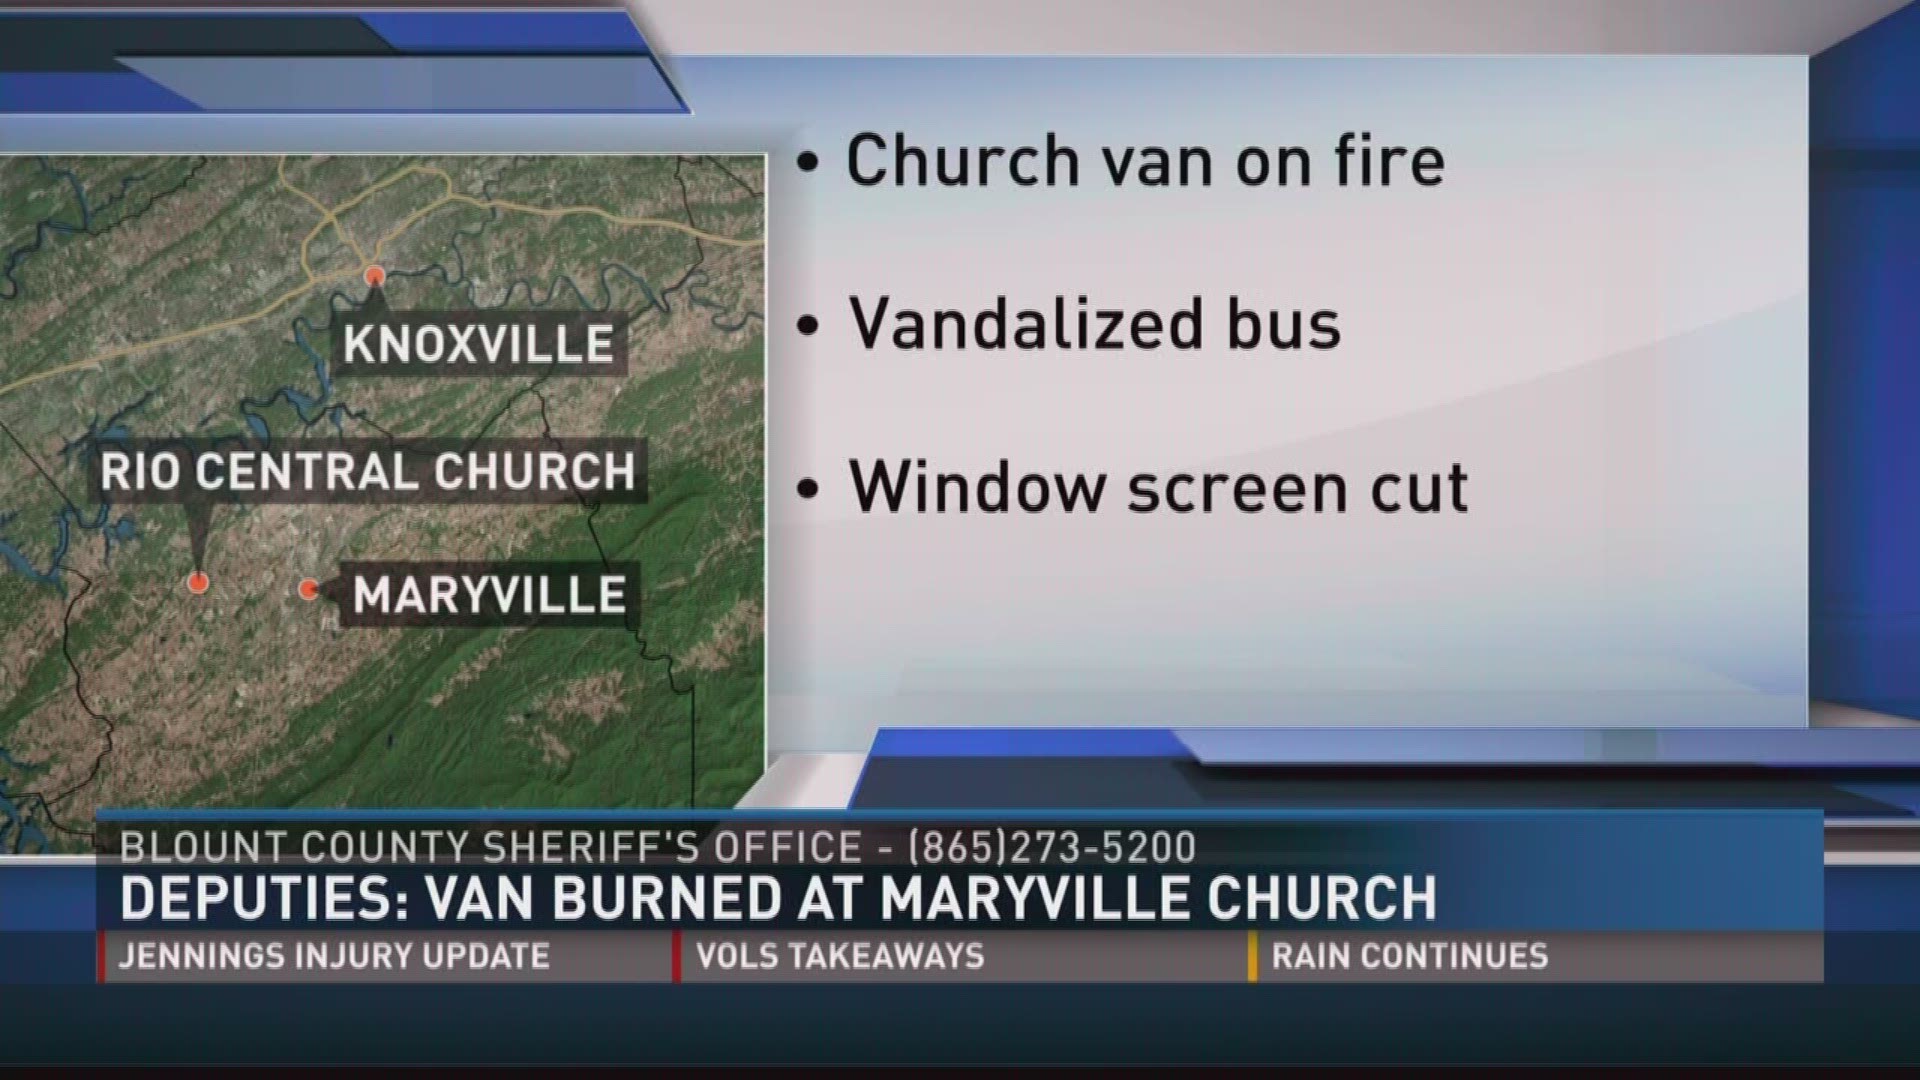 A church van was lit on fire, a bus was vandalized, and a window screen was cut overnight.